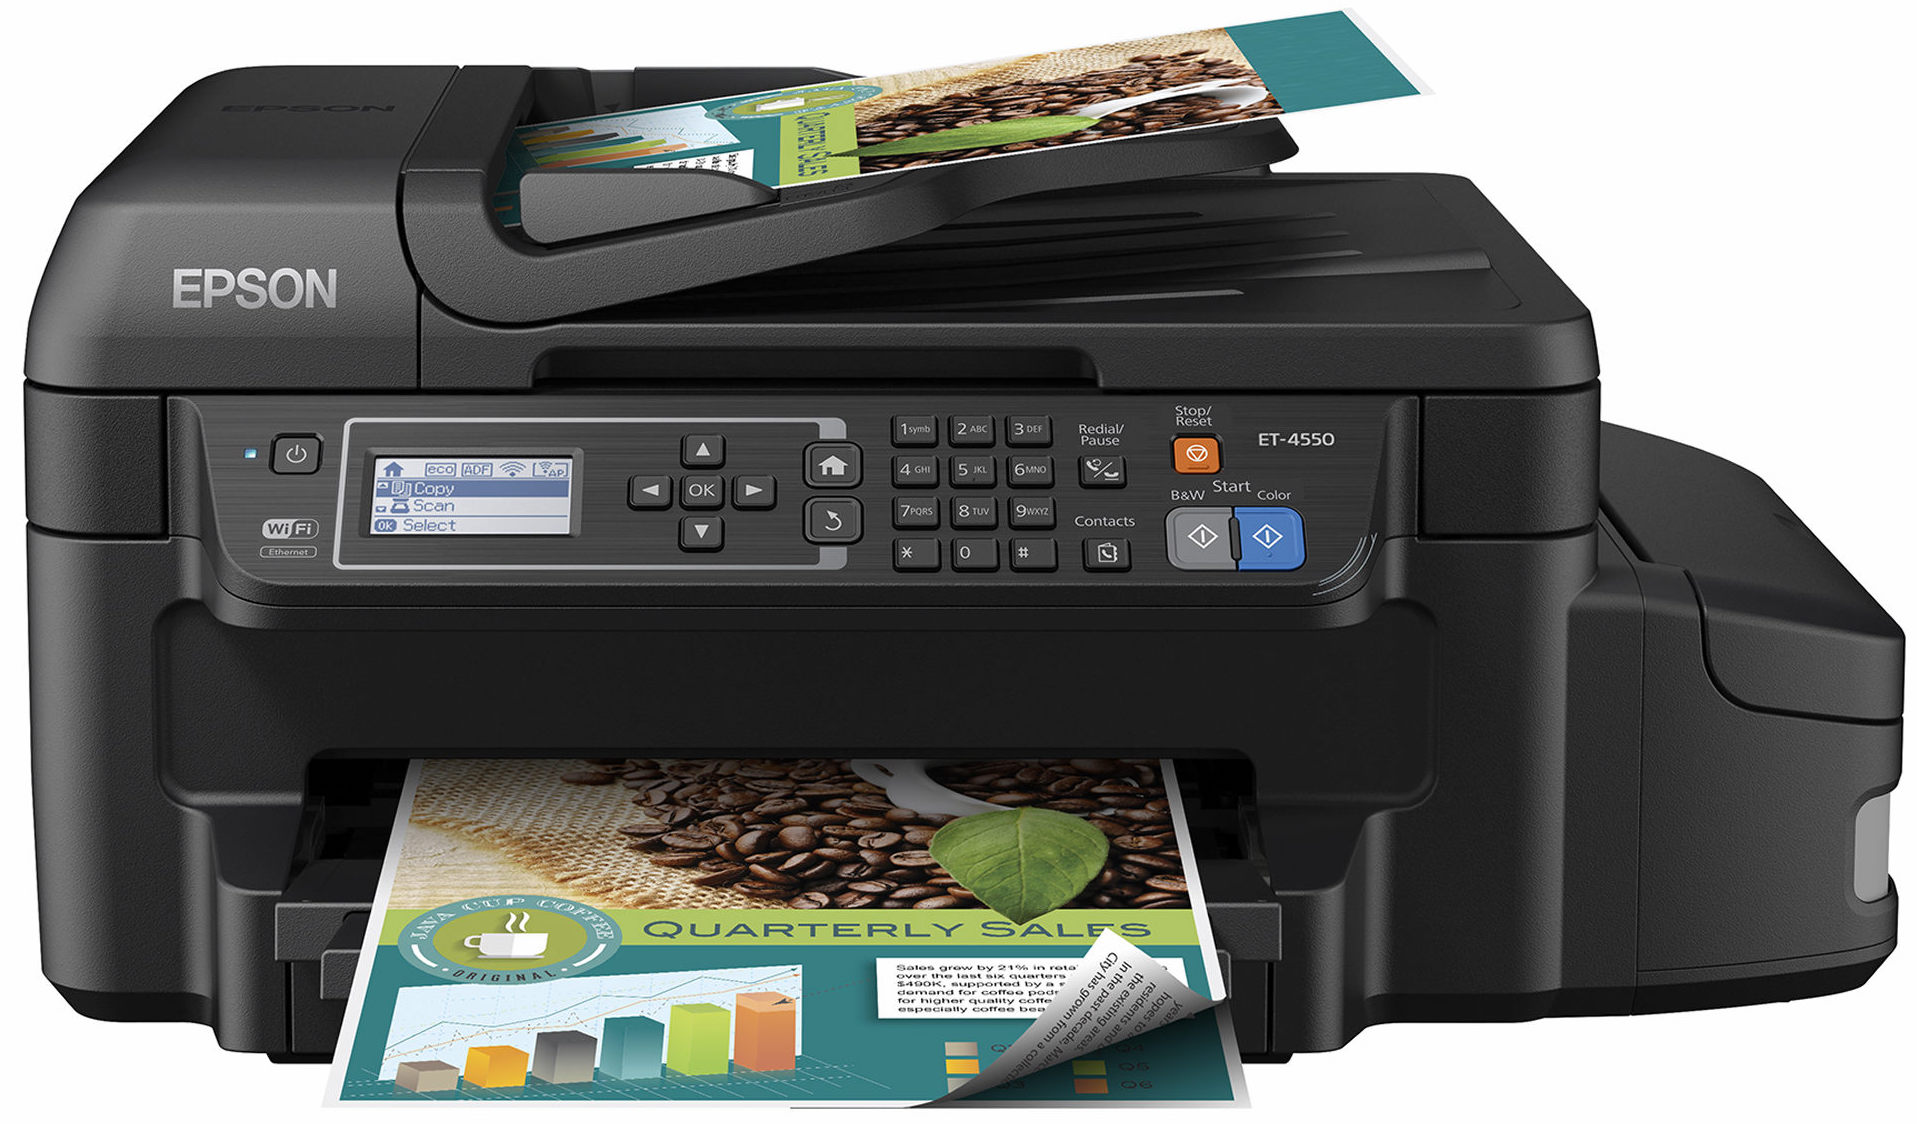 Top Three All-in-One Inkjet Printers